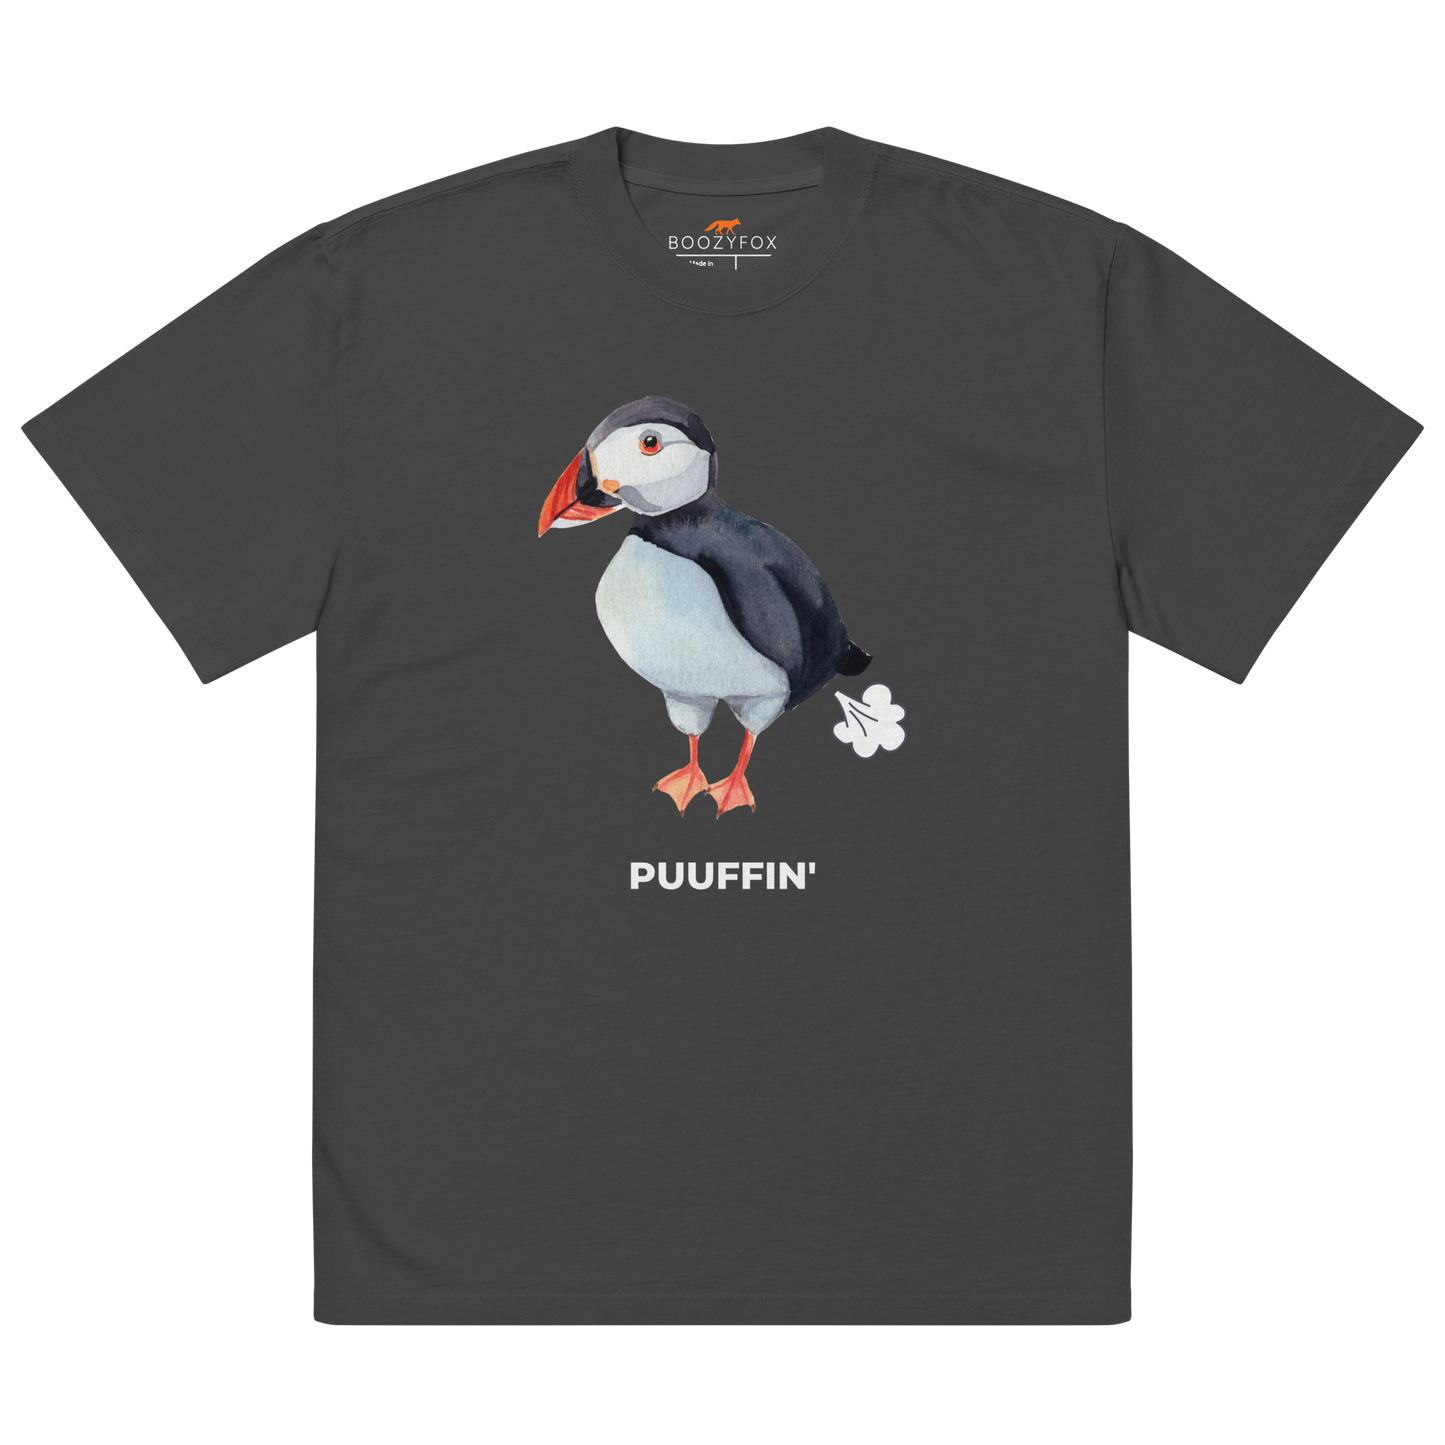 Faded Black Puffin Oversized T-Shirt featuring a comic Puuffin' graphic on the chest - Funny Graphic Puffin Oversized Tees - Boozy Fox